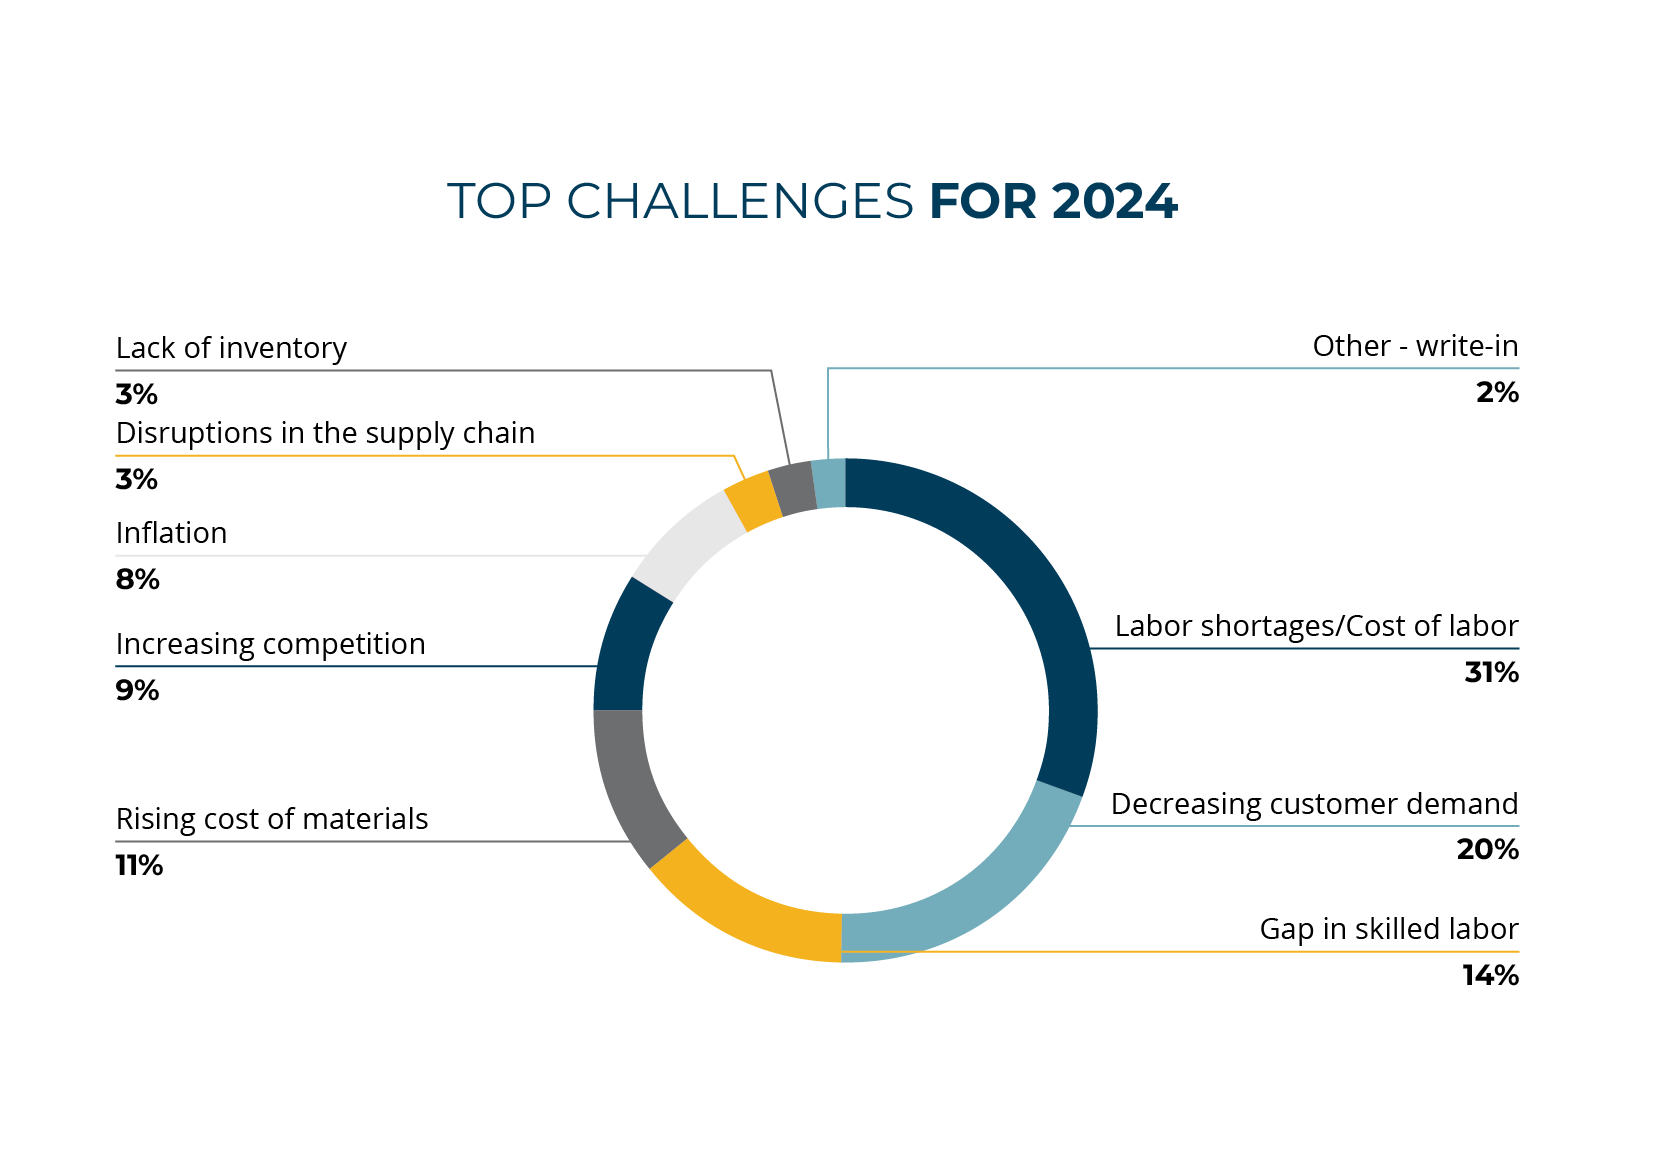 Top Challenges for 2024